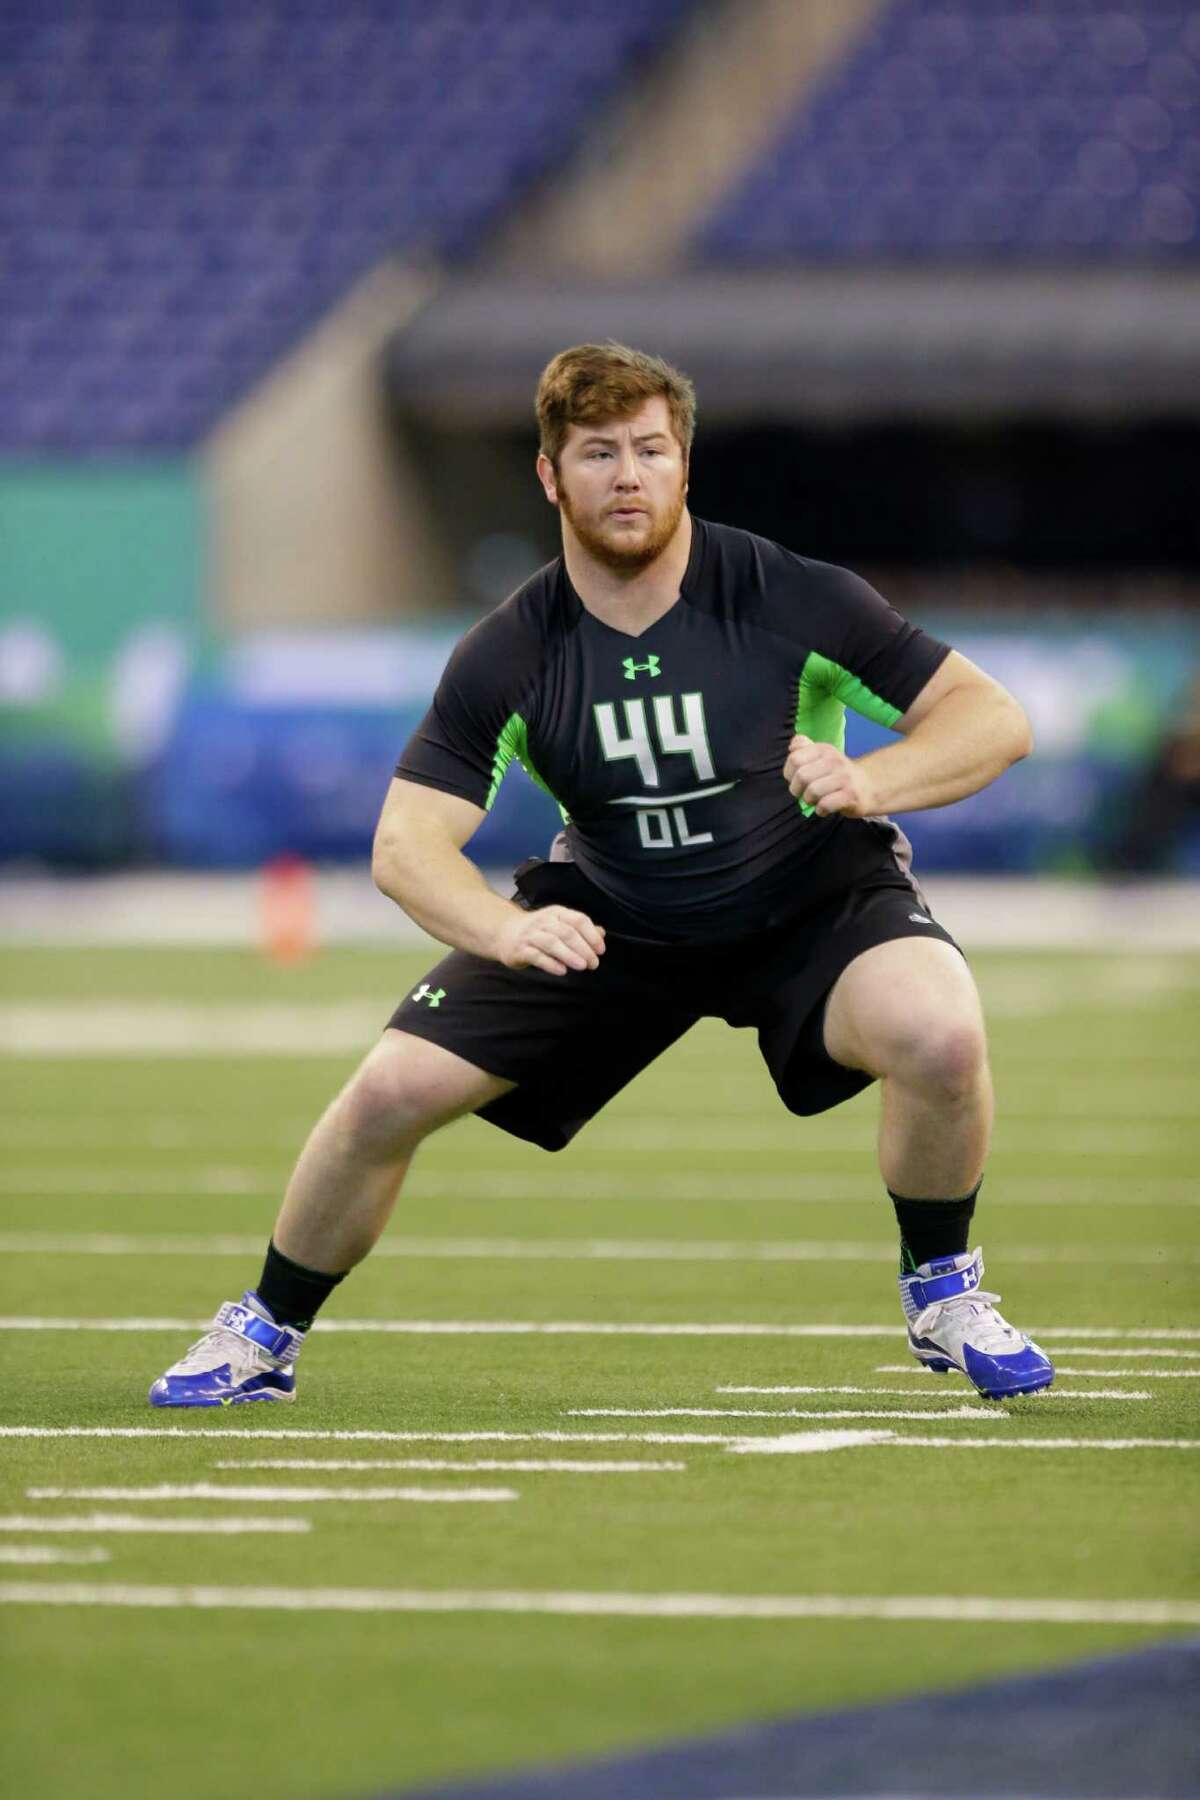 North Carolina State offensive lineman Joe Thuney runs a drill at the NFL football scouting combine in Indianapolis, Friday, Feb. 26, 2016.